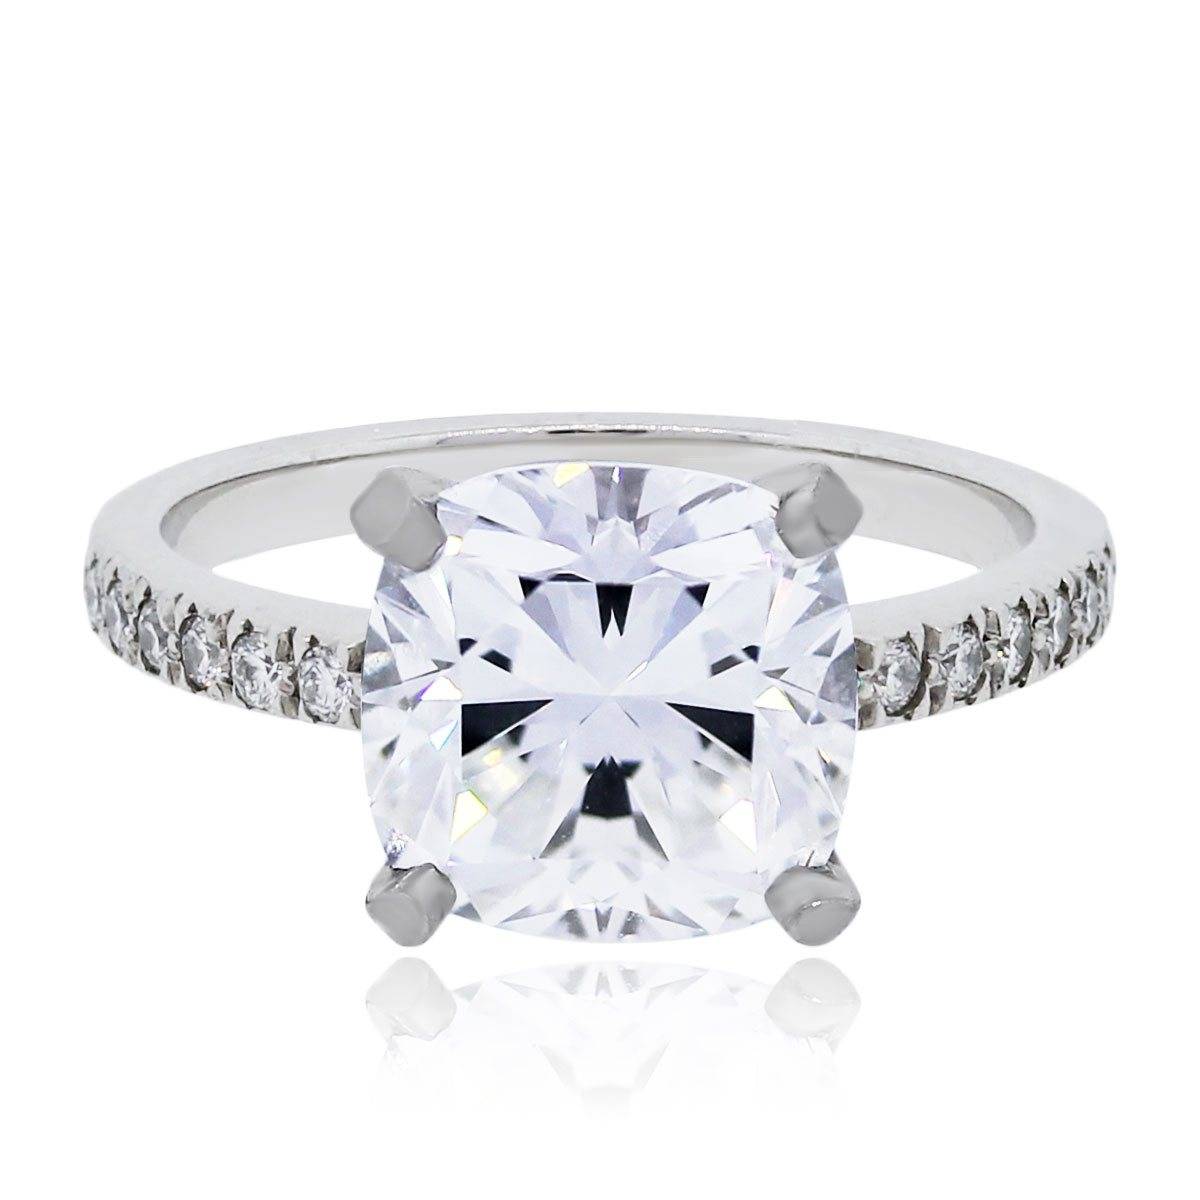 This amazing cushion cut Tiffany engagement ring is $10,000 less than retail. Guess How!